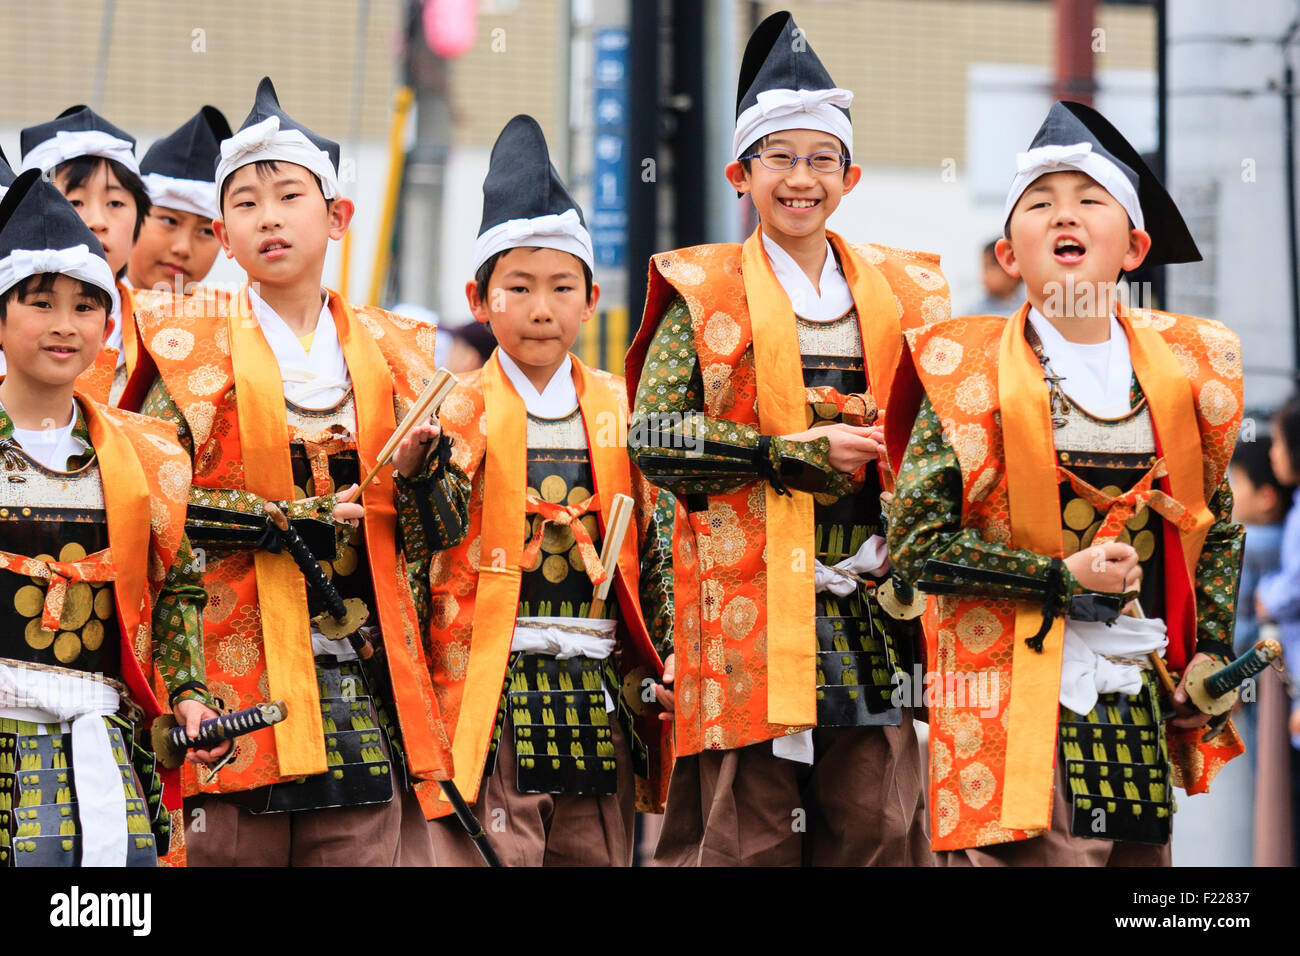 Genji Festival parade in Japan.Young children, boys, 8-10 year old, dressed as Shimobe soldiers from the heian era. Green armour and orange robe. Stock Photo